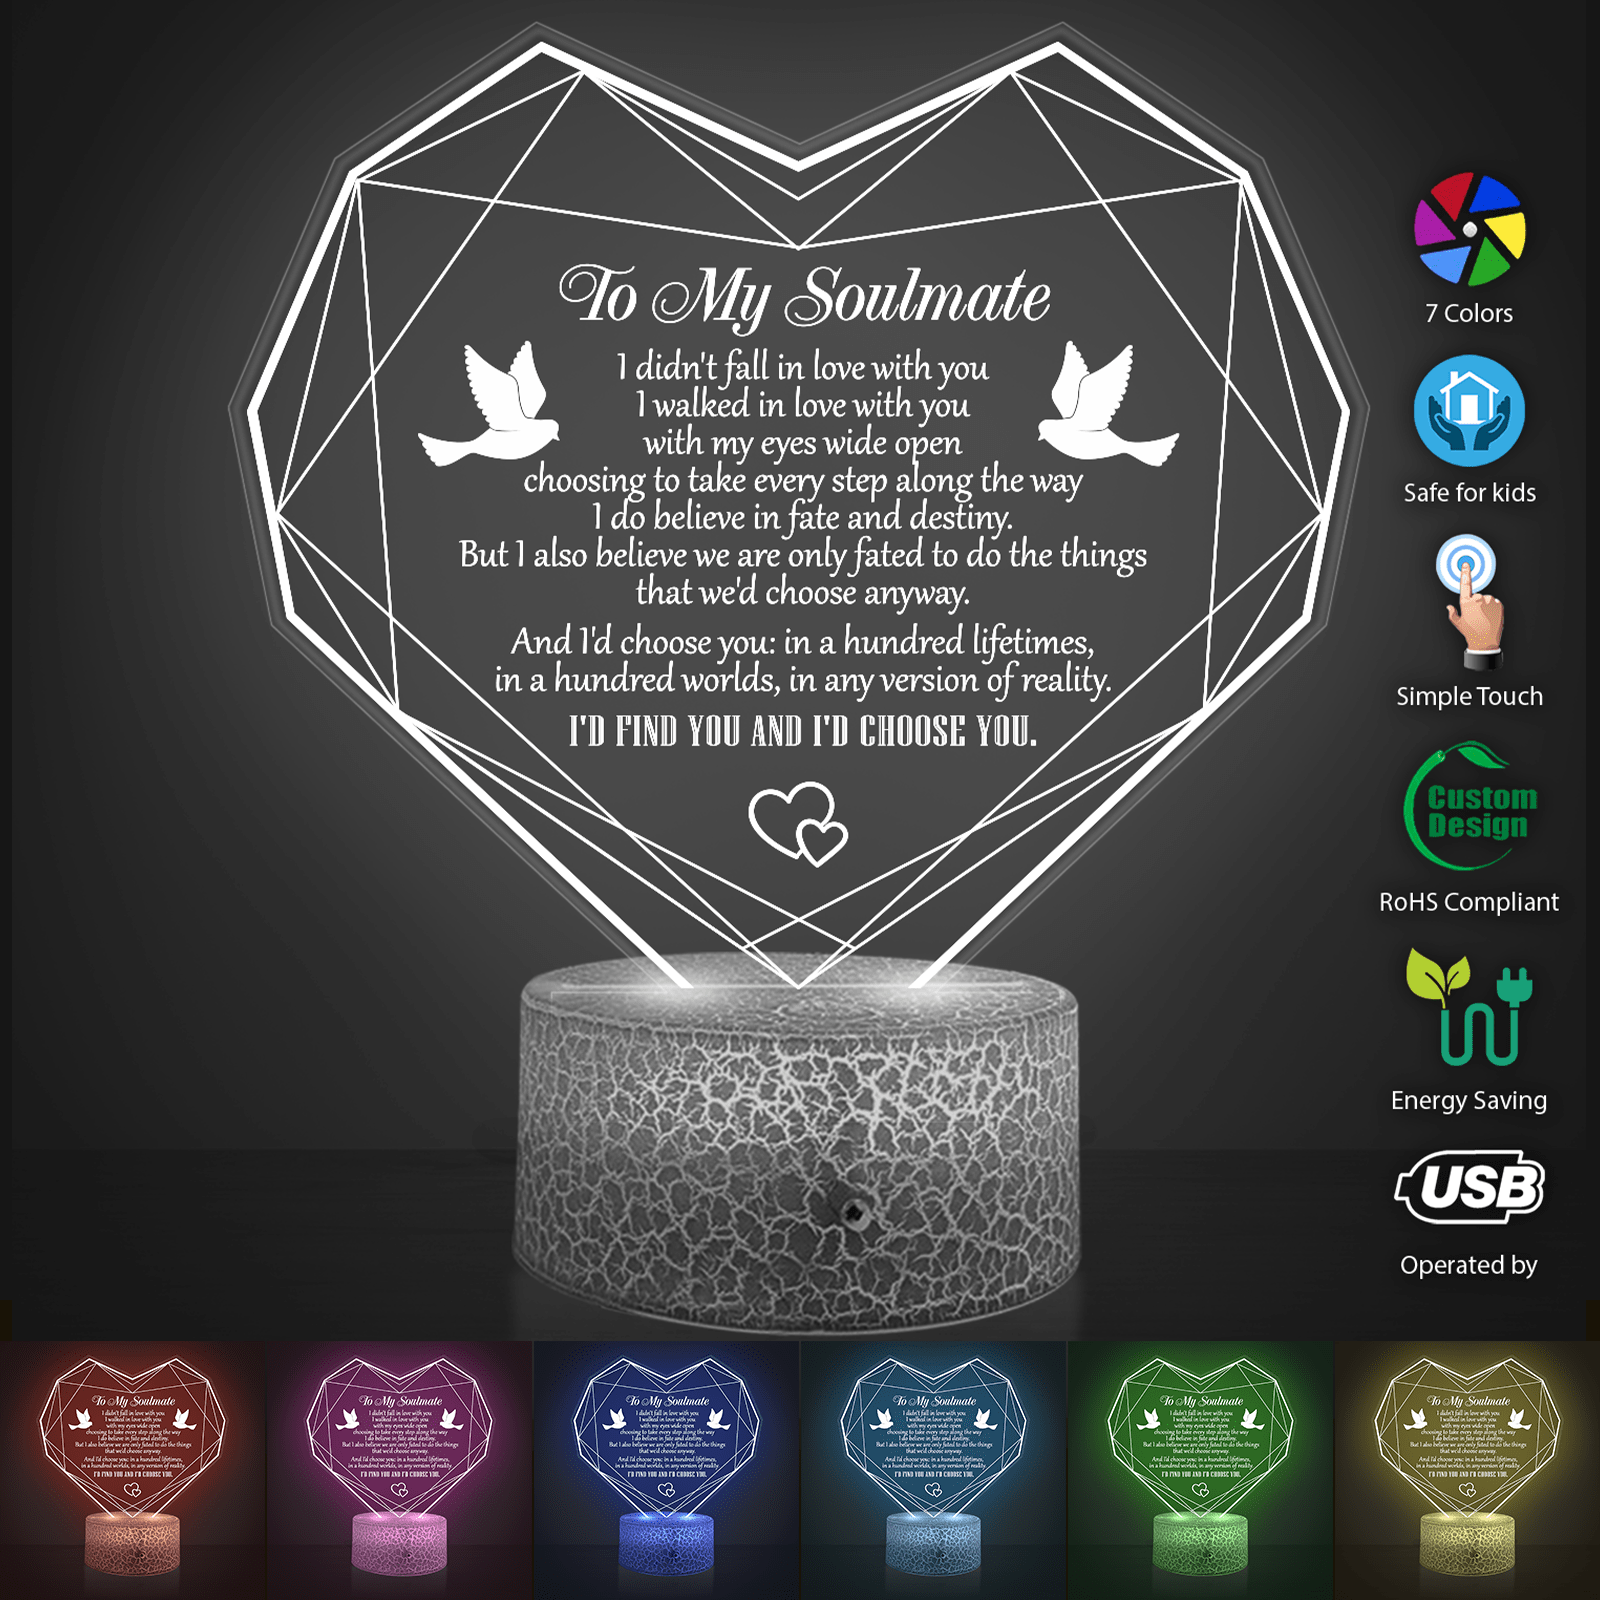 Heart Led Light - Family - To My Soulmate - I'd Choose You In Any Version Of Reality - Ukglca13035